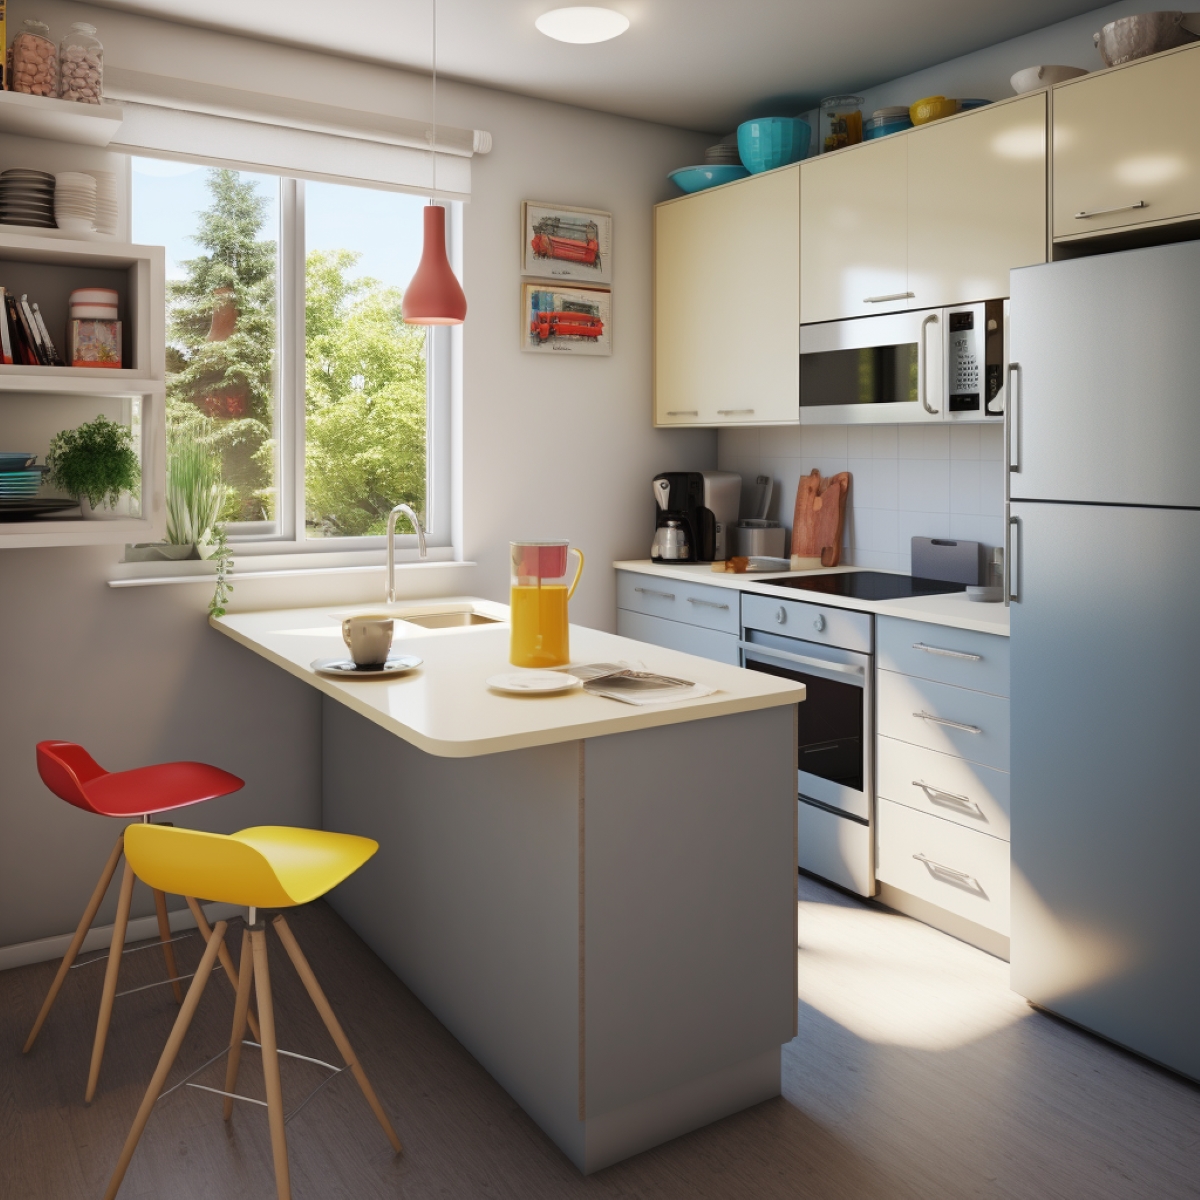 Small kitchenette with yellow and red chairs.